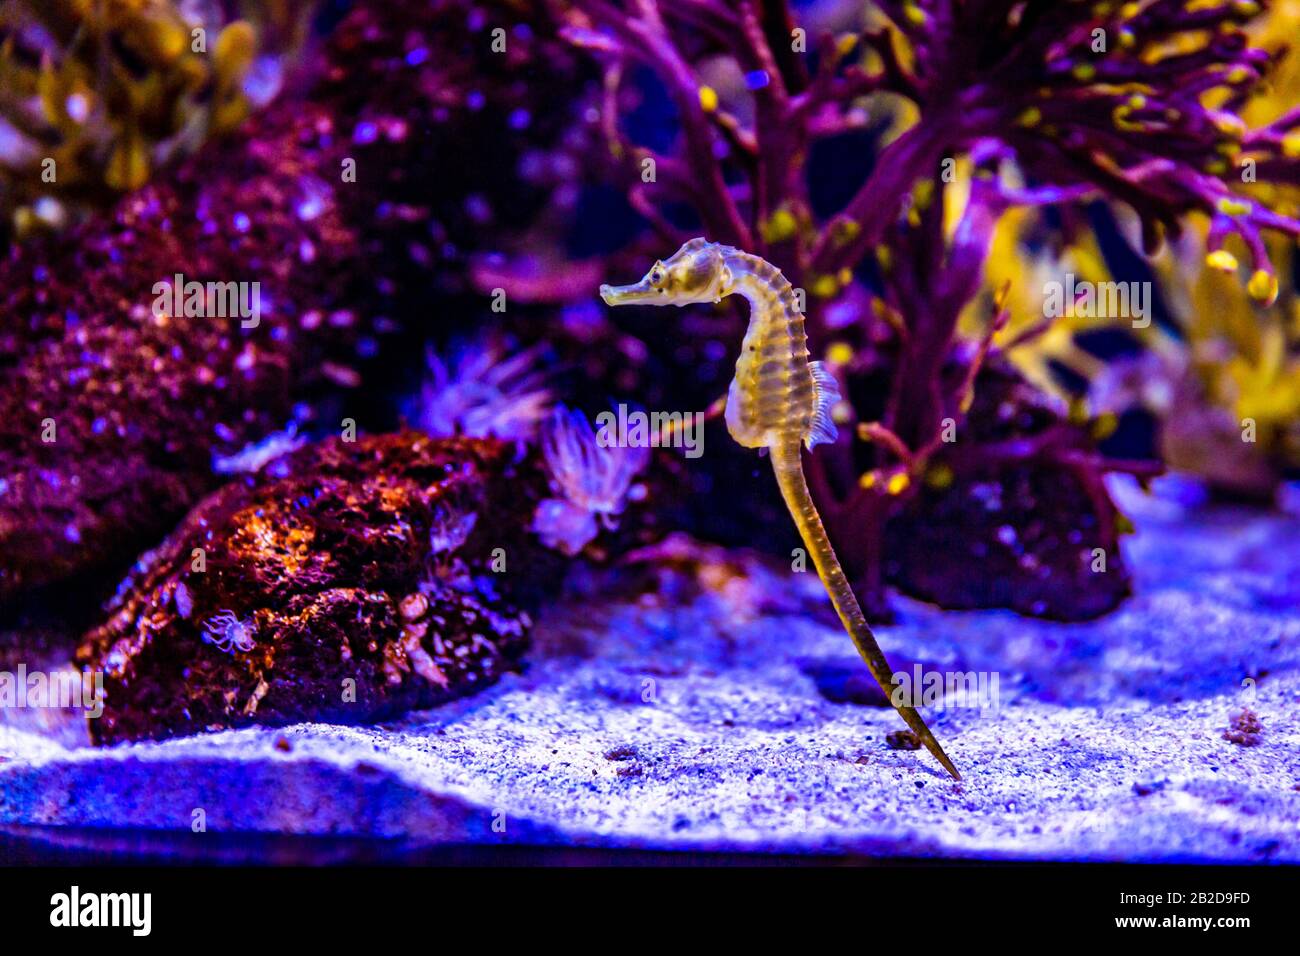 Potbelly Seahorse in Aquarium tank, with purple coral reef in background Stock Photo